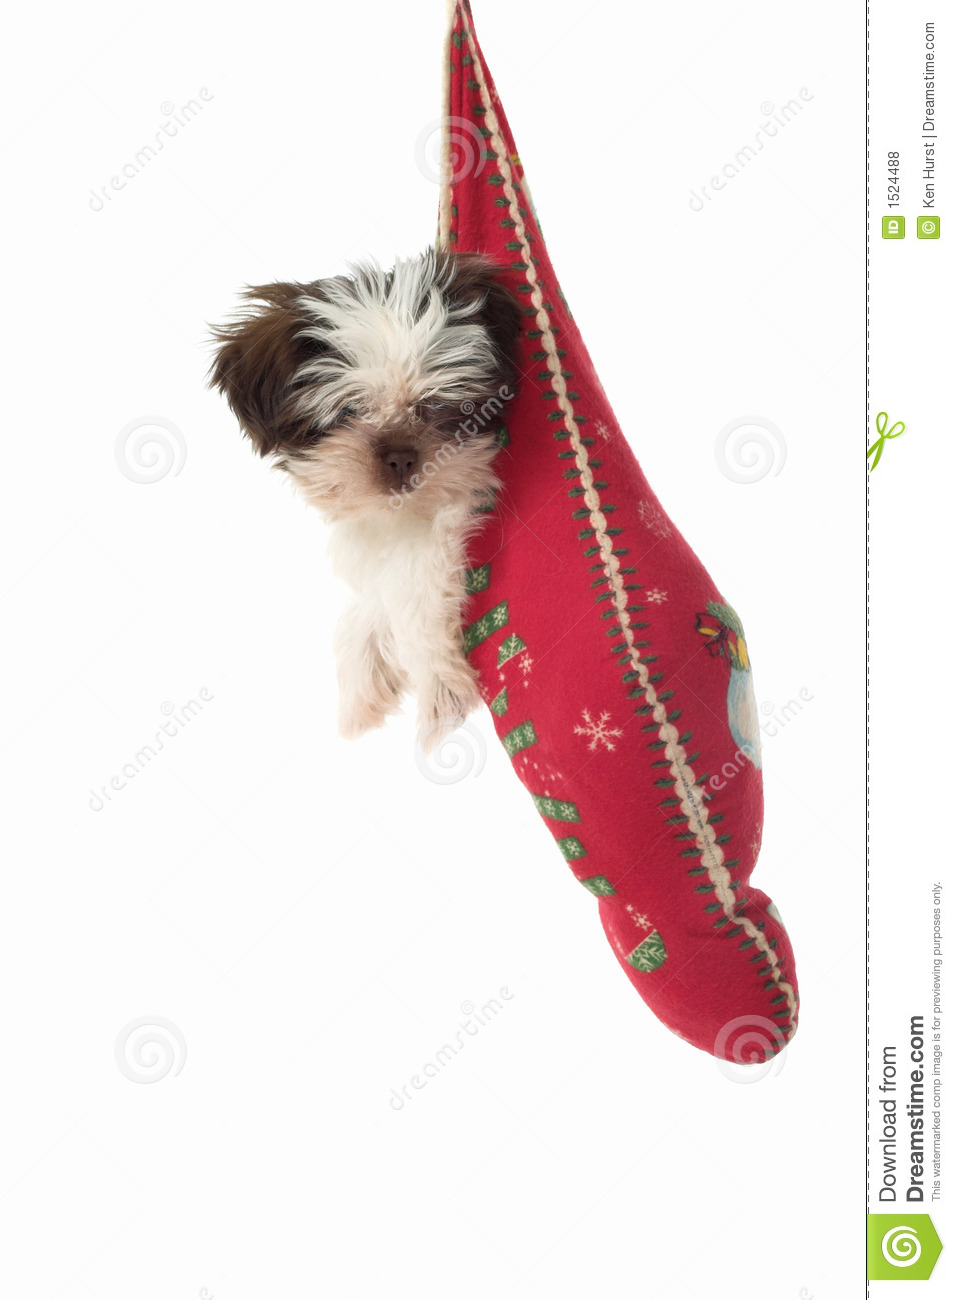 Puppy Hanging Around In Christmas Stocking Royalty Free Stock Photos